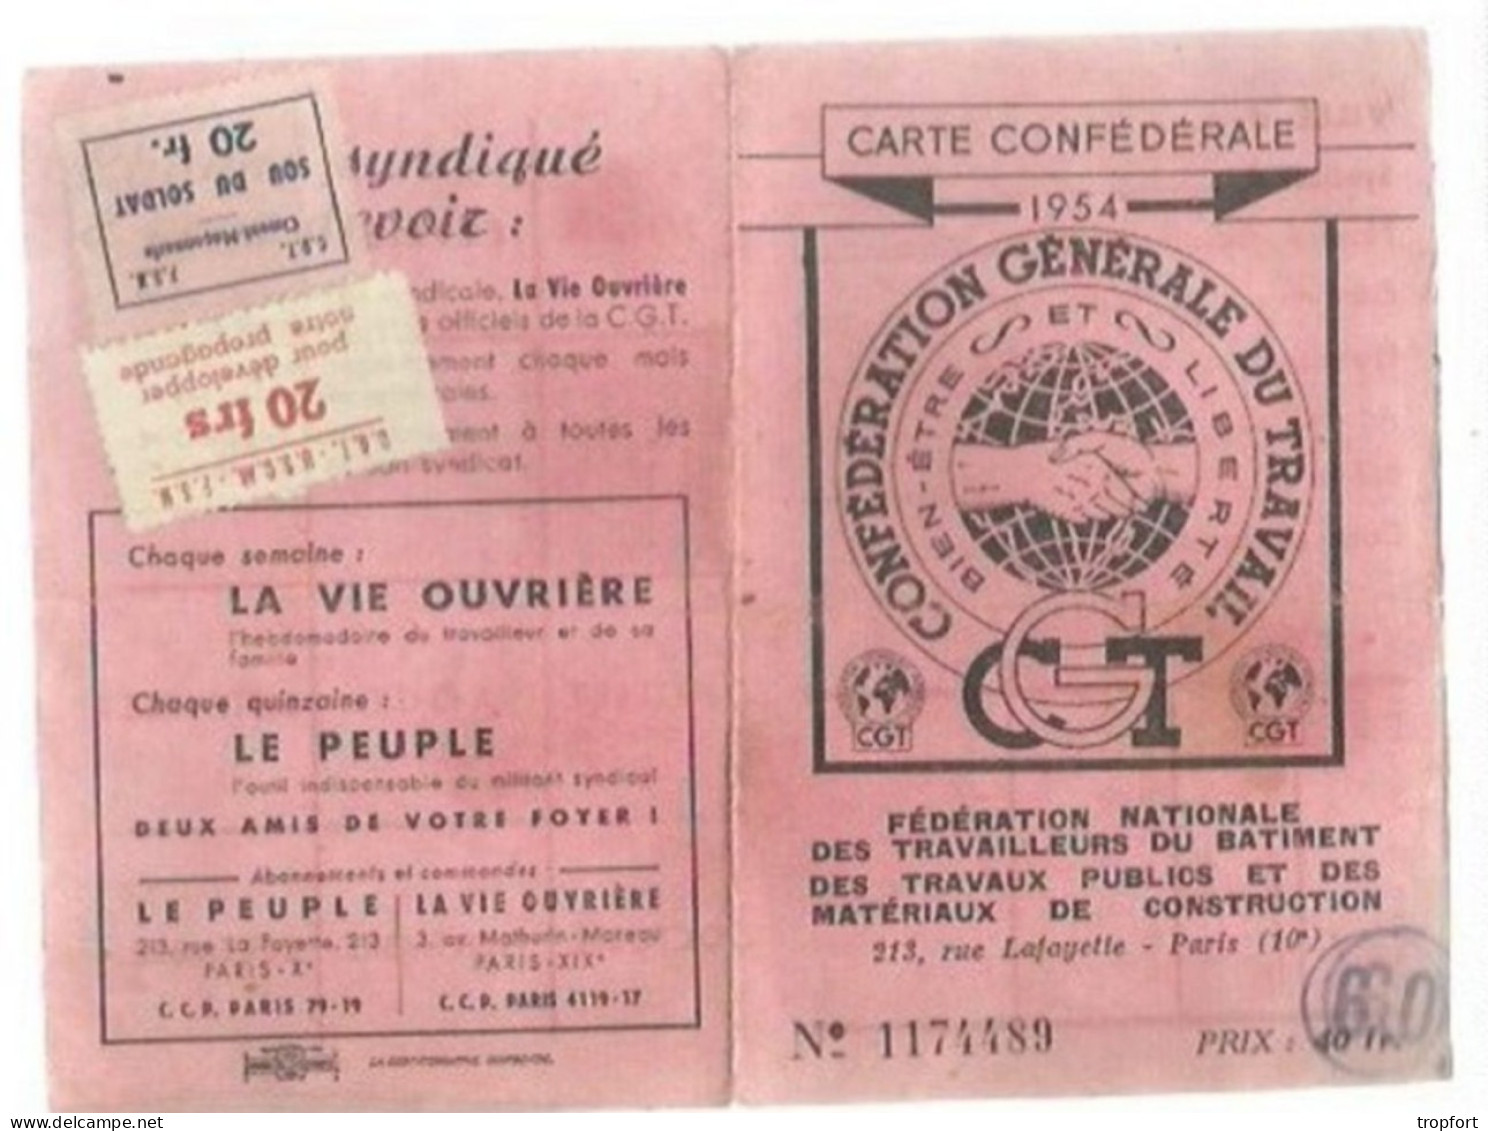 PG / CARTE 1954 SYNDICALE CGT  Avec Ses Timbres Adhèrent  SYNDICAT C.G.T  TIMBRE TAMPON CACHET - Membership Cards